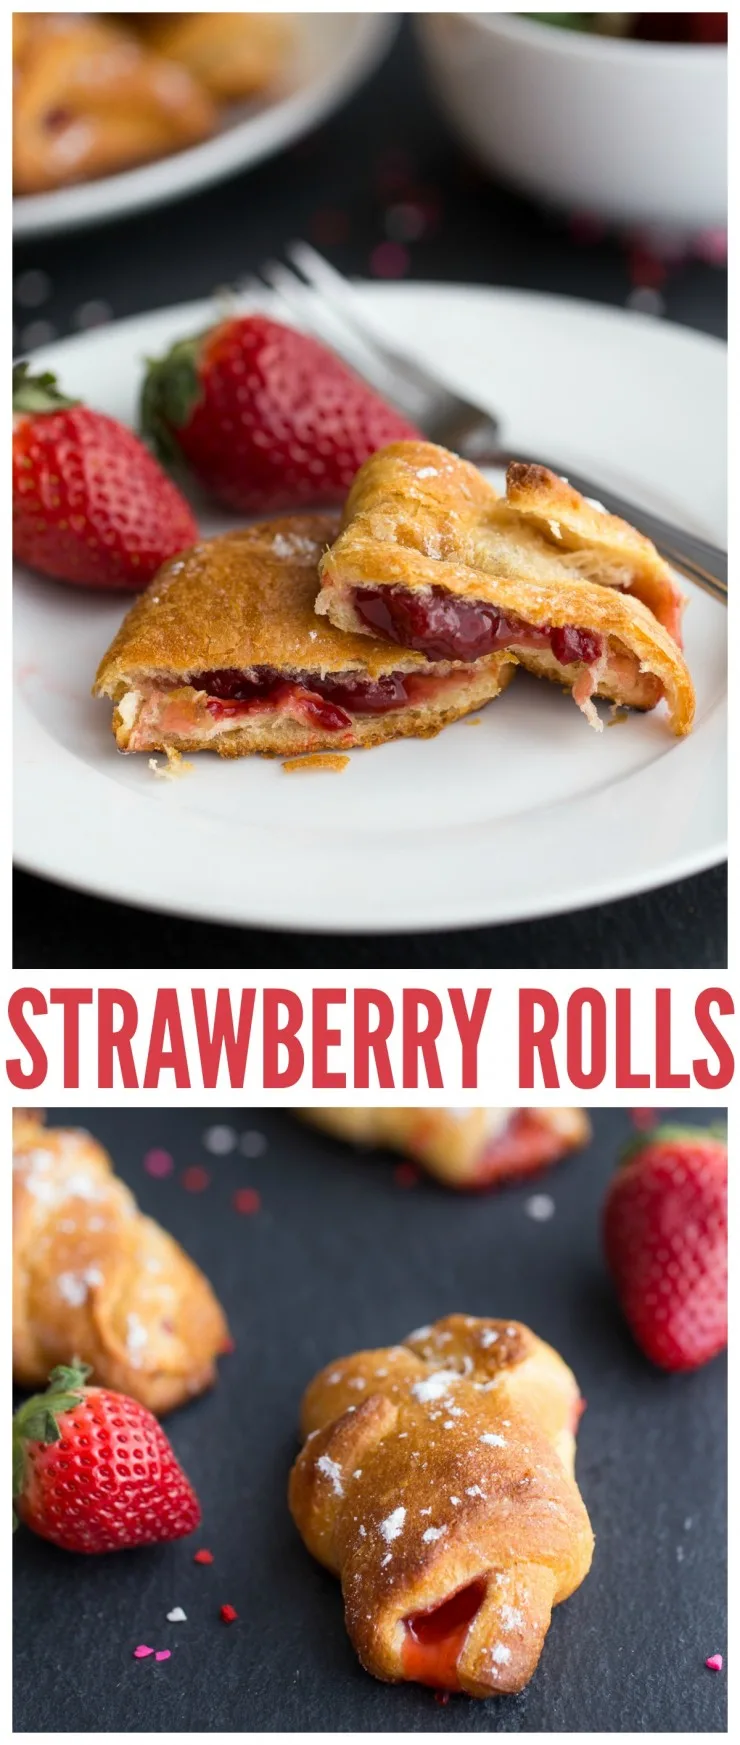 These strawberry rolls are an easy breakfast treat that can easily be dessert and made quickly enough to satisfy any sweet tooth!